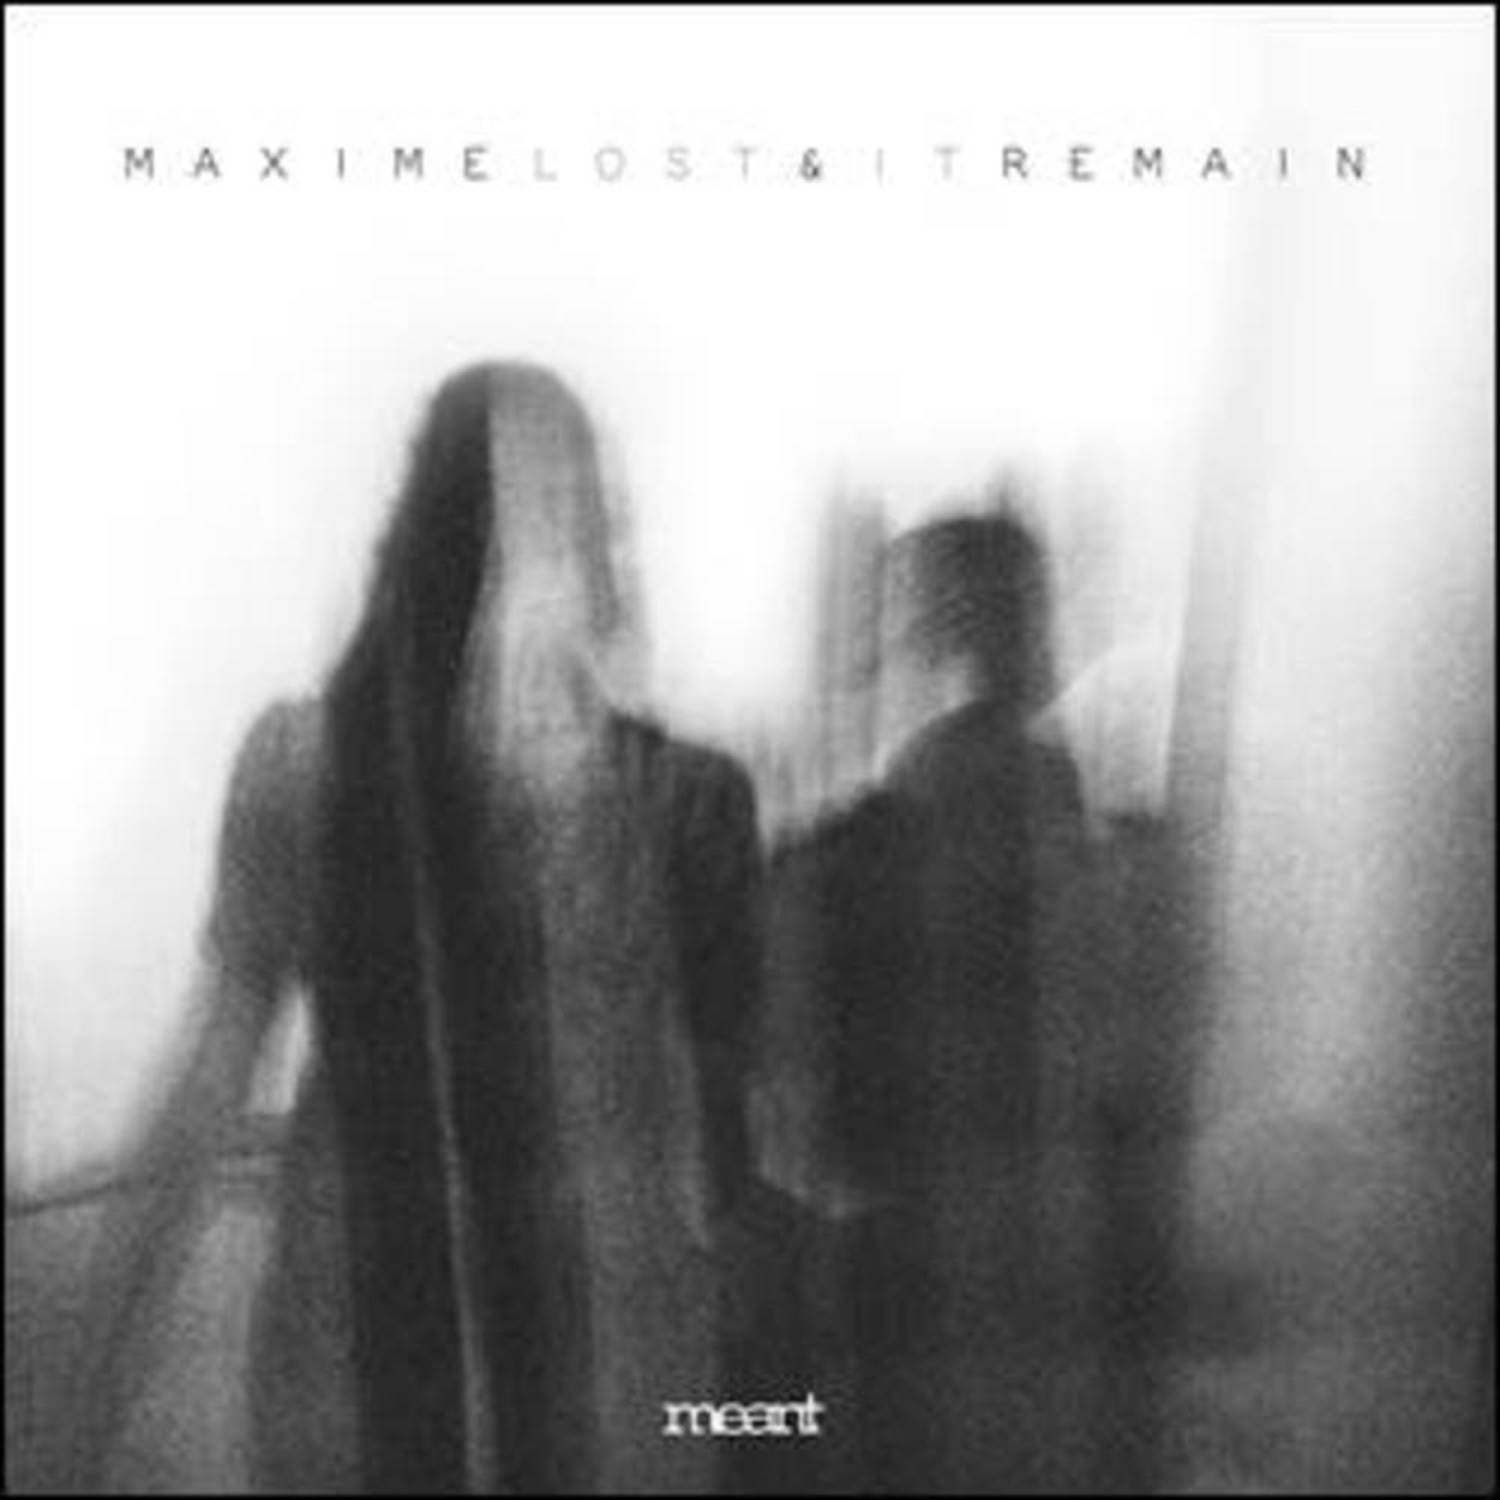 Maxime & Remain - LOST IT EP